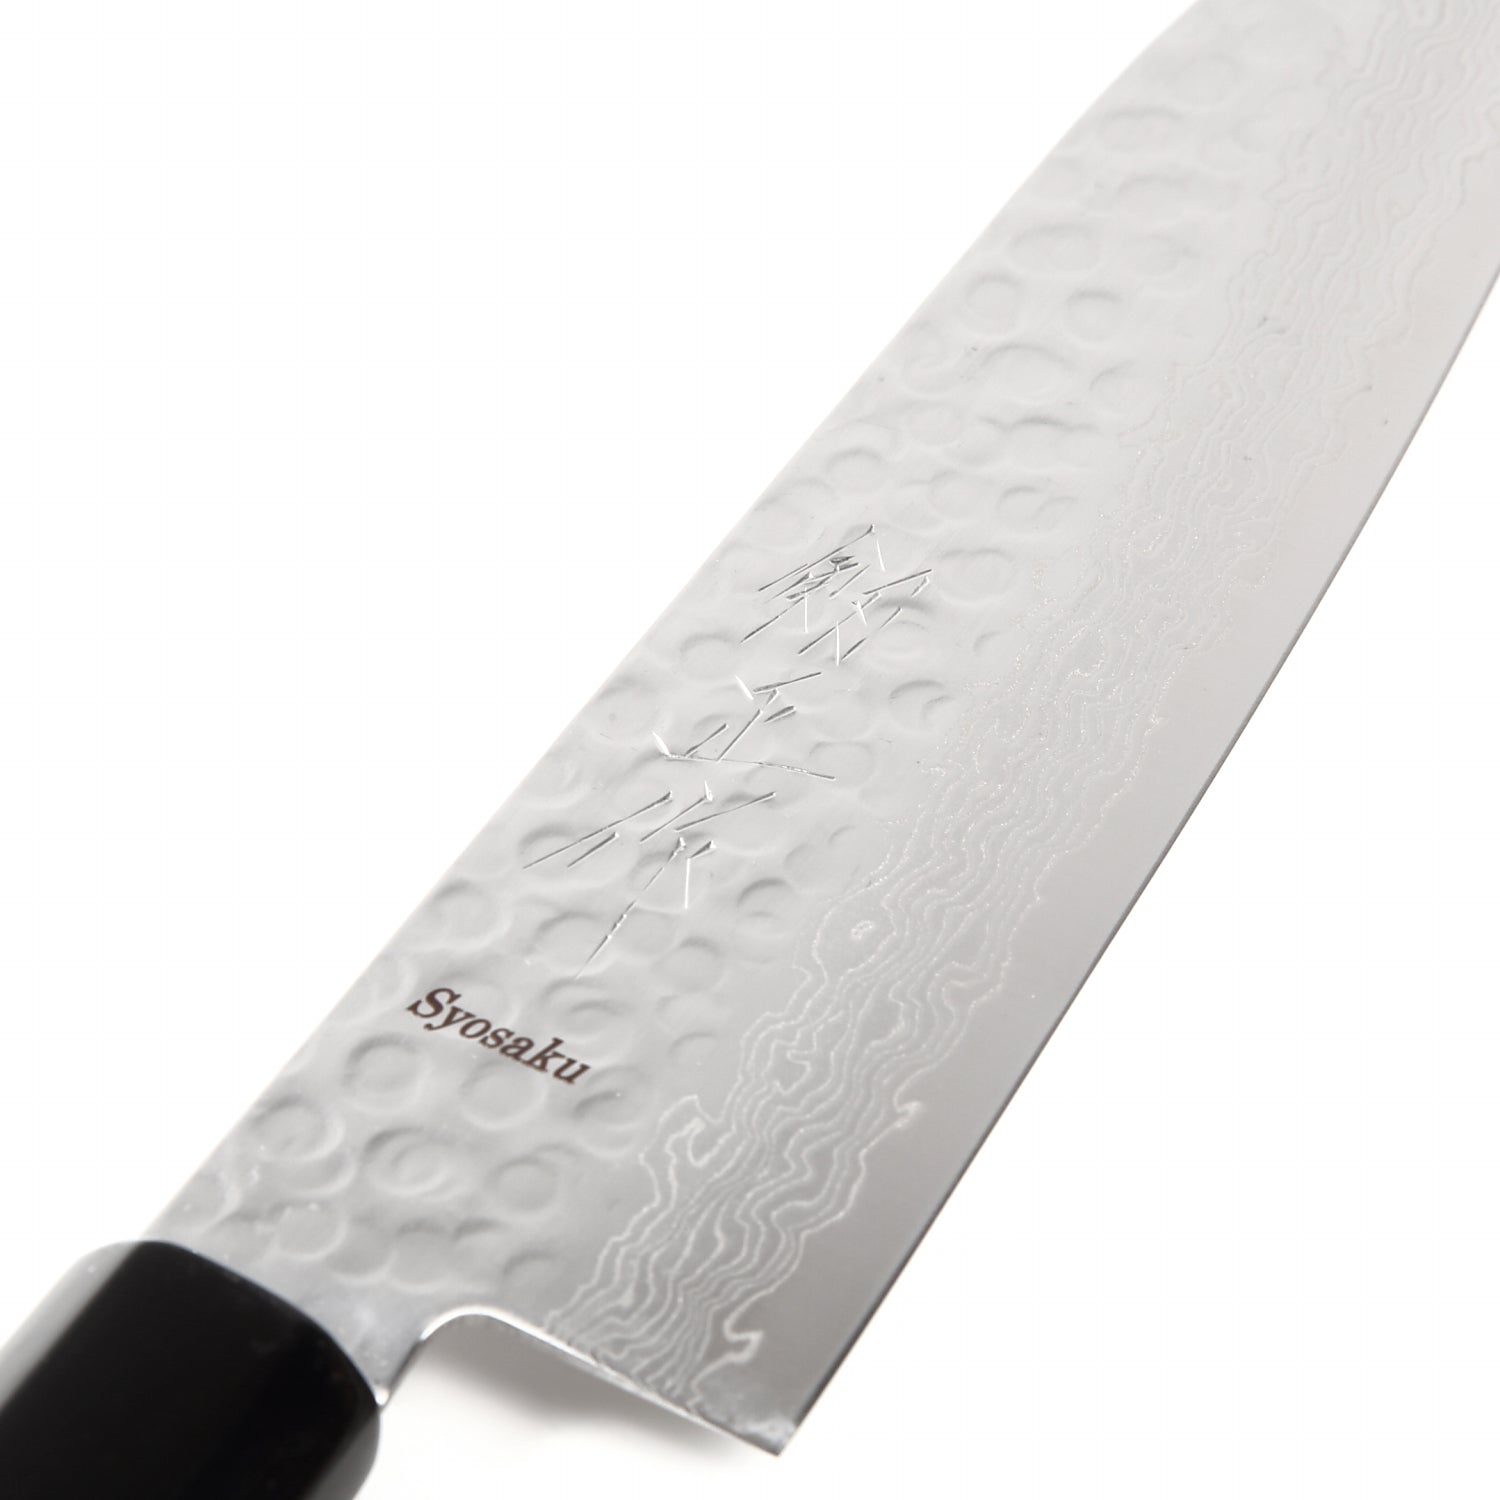 MAD SHARK Santoku Knife 8 Inch, Japanese Chef Knife, Multi-purpose Kitchen  Cooking Knife for Chopping Meat and Vegetables, Ergonomic 2.0 Handle